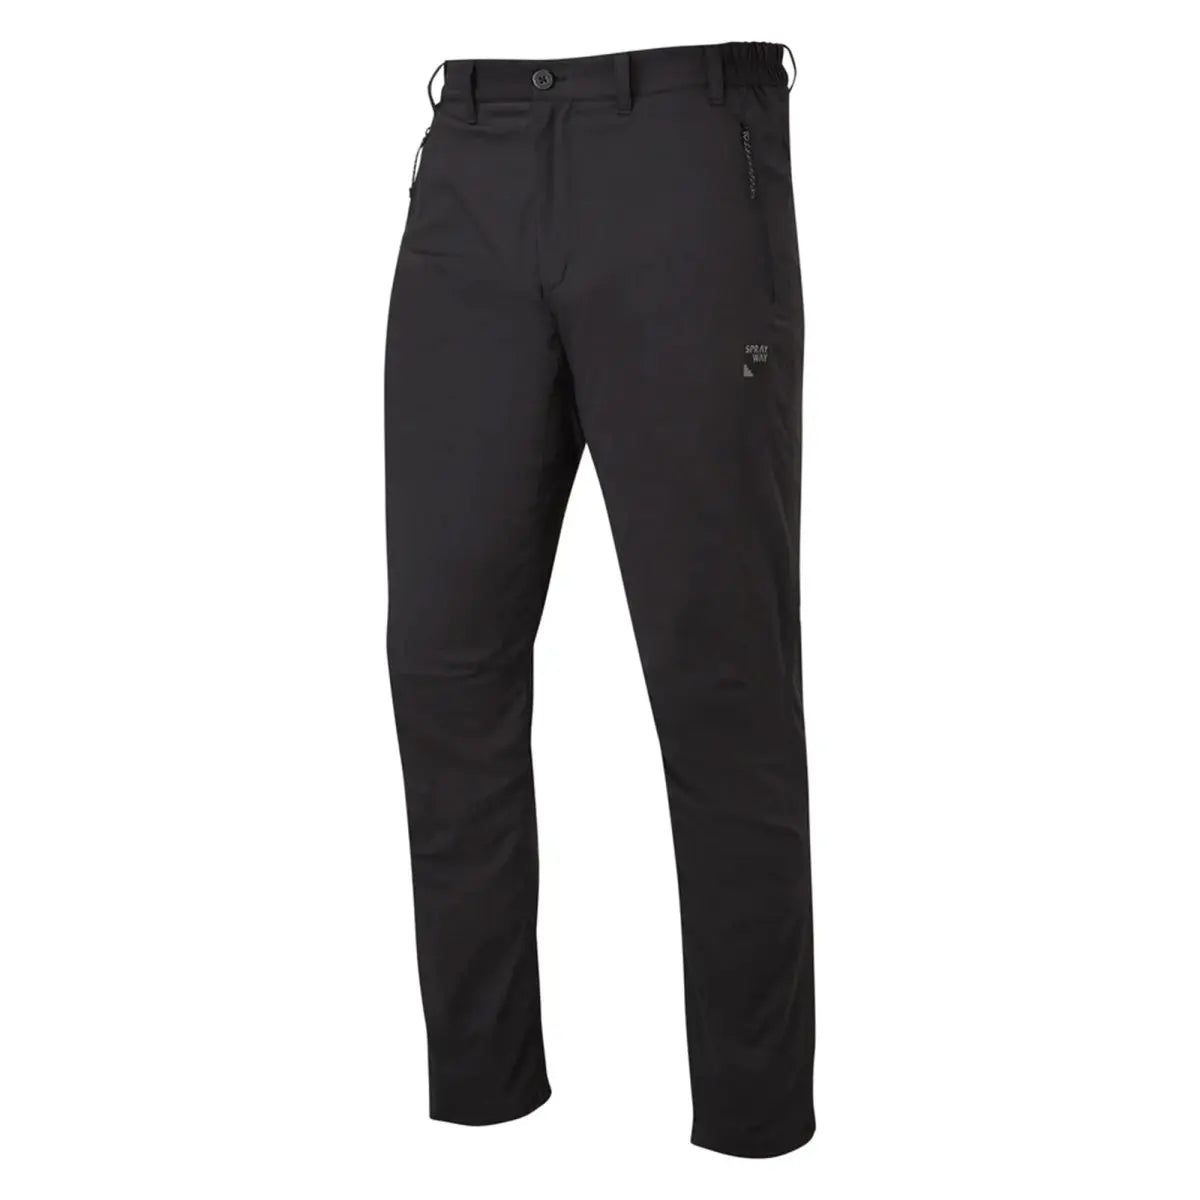 Men's Waterproof Pants | Stay Dry and Active Outdoors